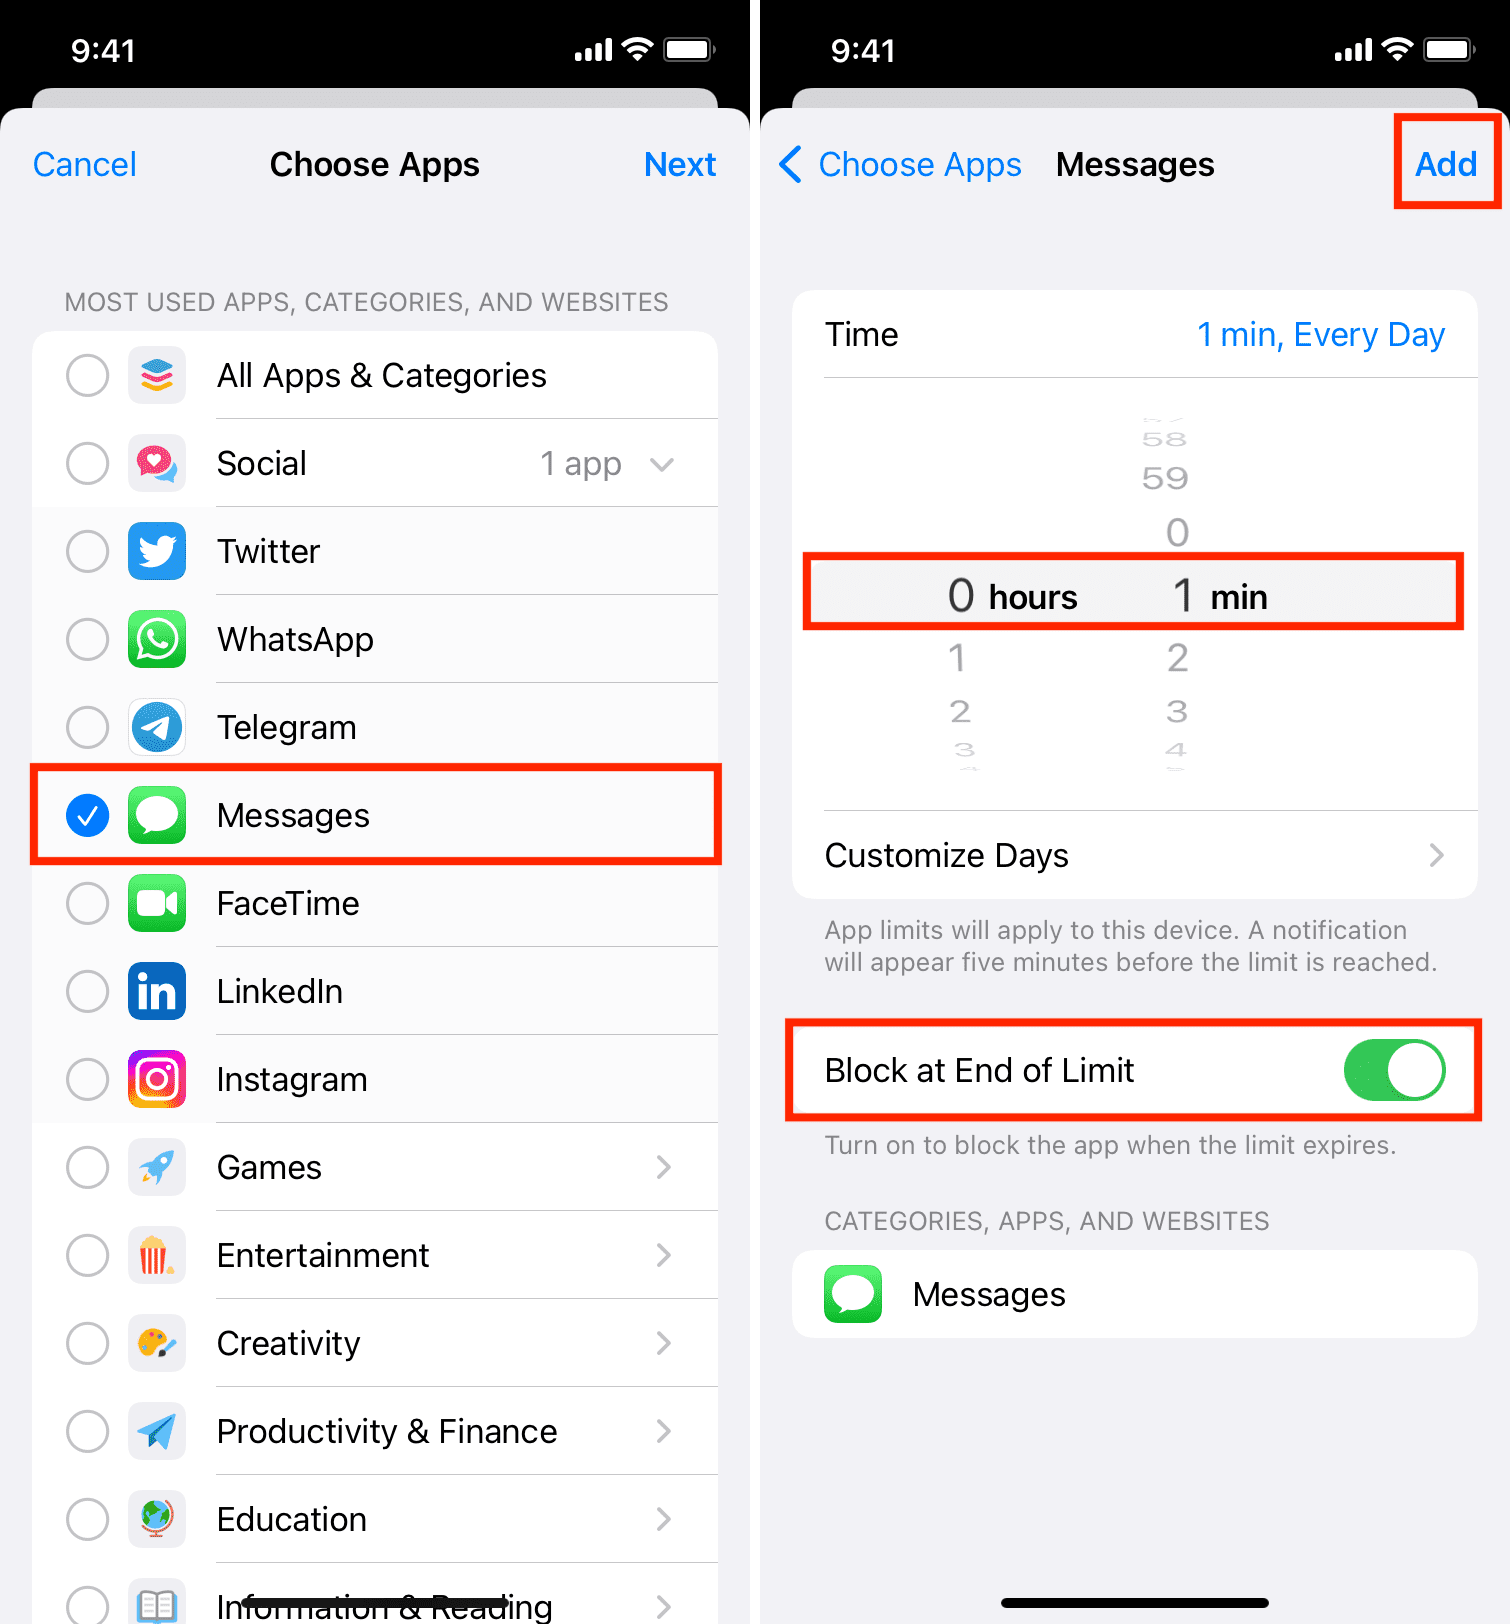 Add one minute limit for Messages app on iPhone